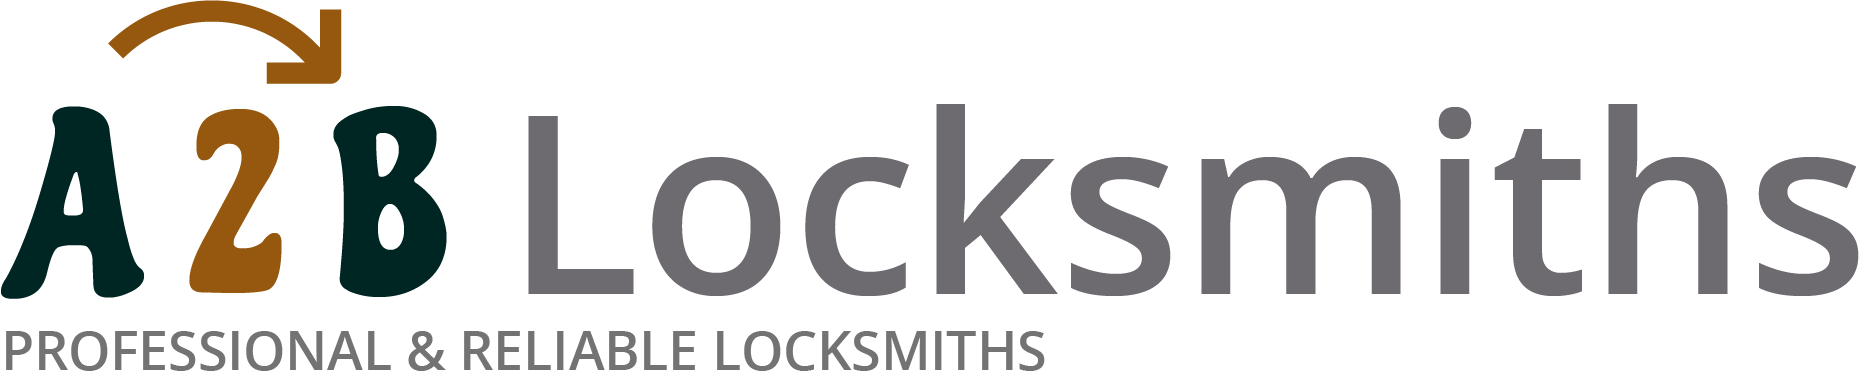 If you are locked out of house in Melksham, our 24/7 local emergency locksmith services can help you.